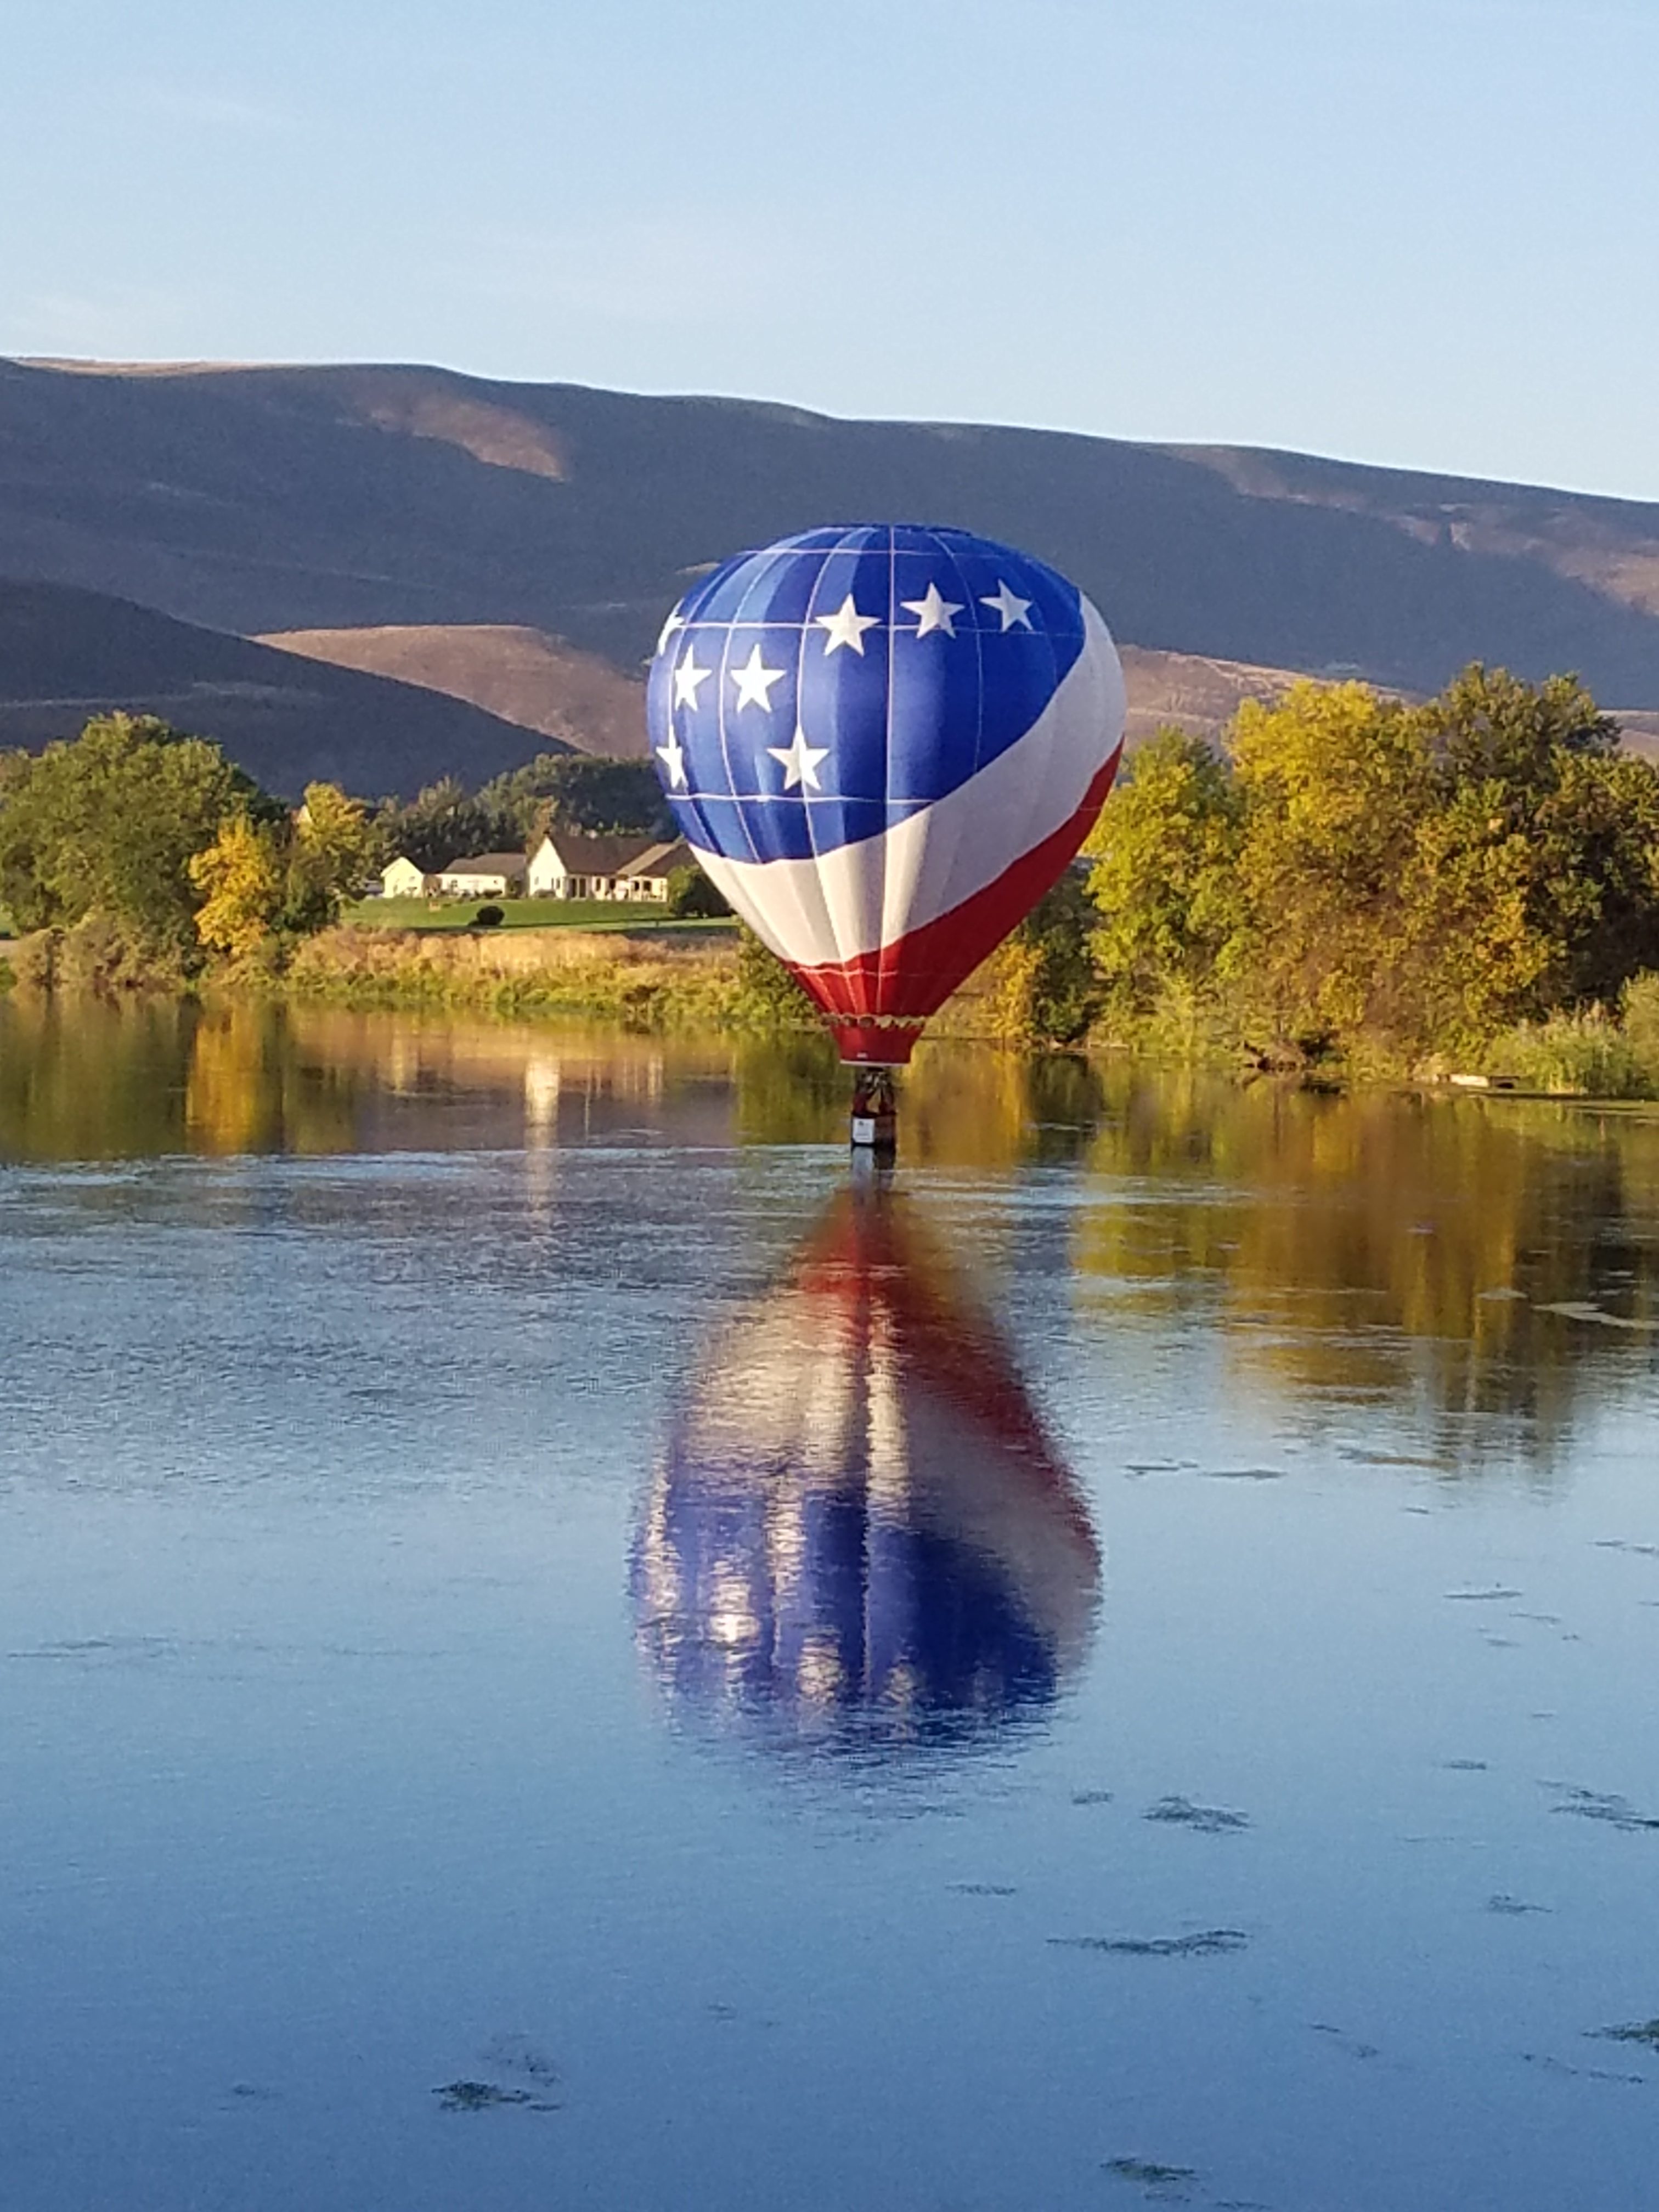 Great Prosser Balloon Rally for everyone. Stay at Wine Country RV Park.